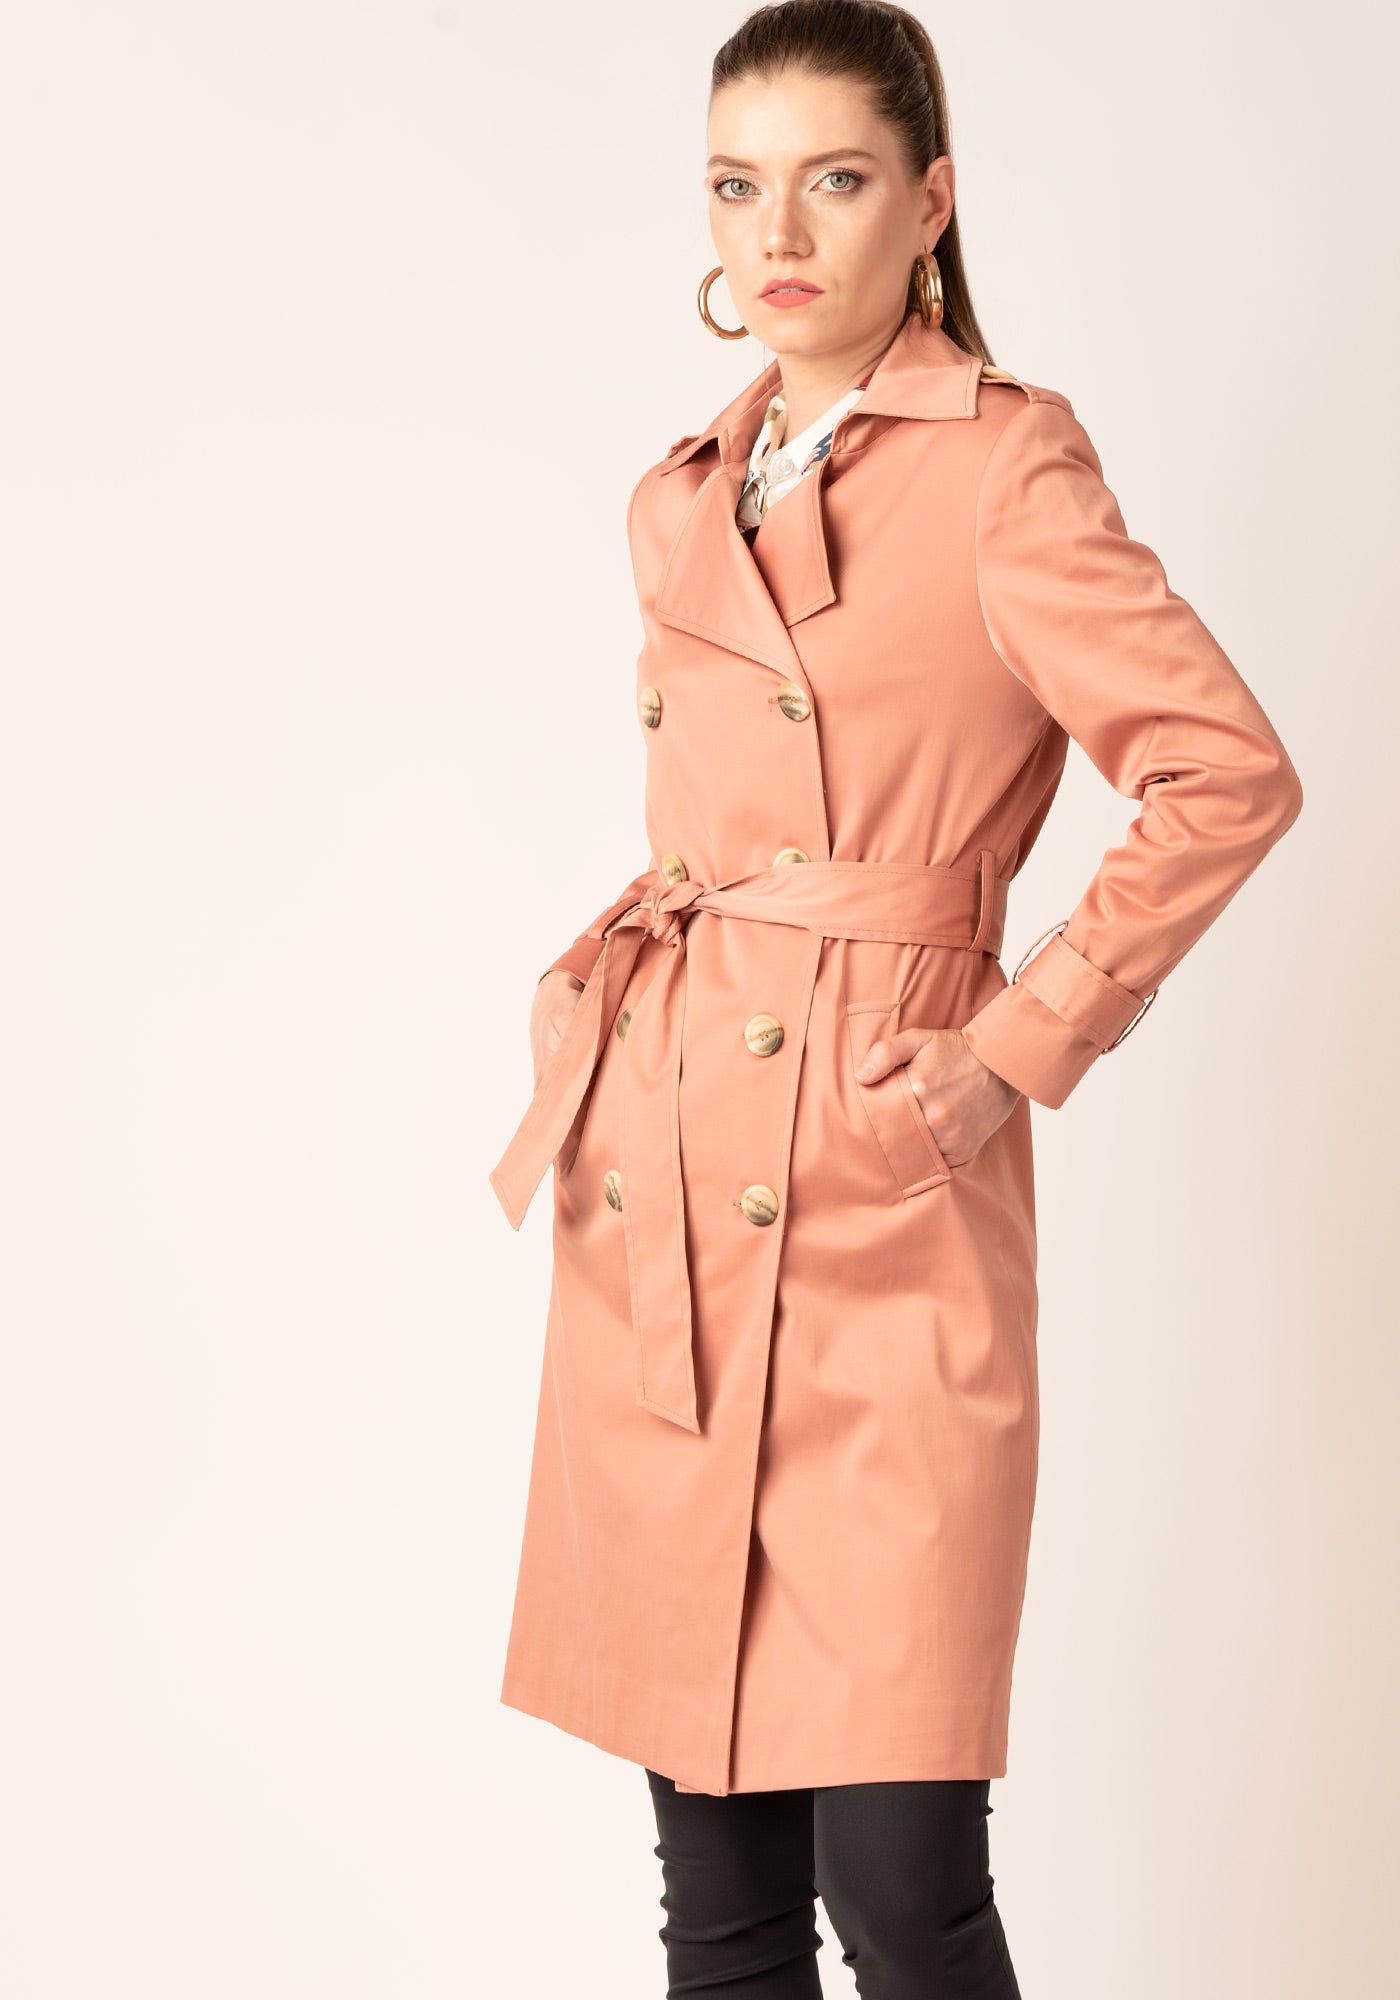 Women's Tailored Double breasted Trench coat in Brick